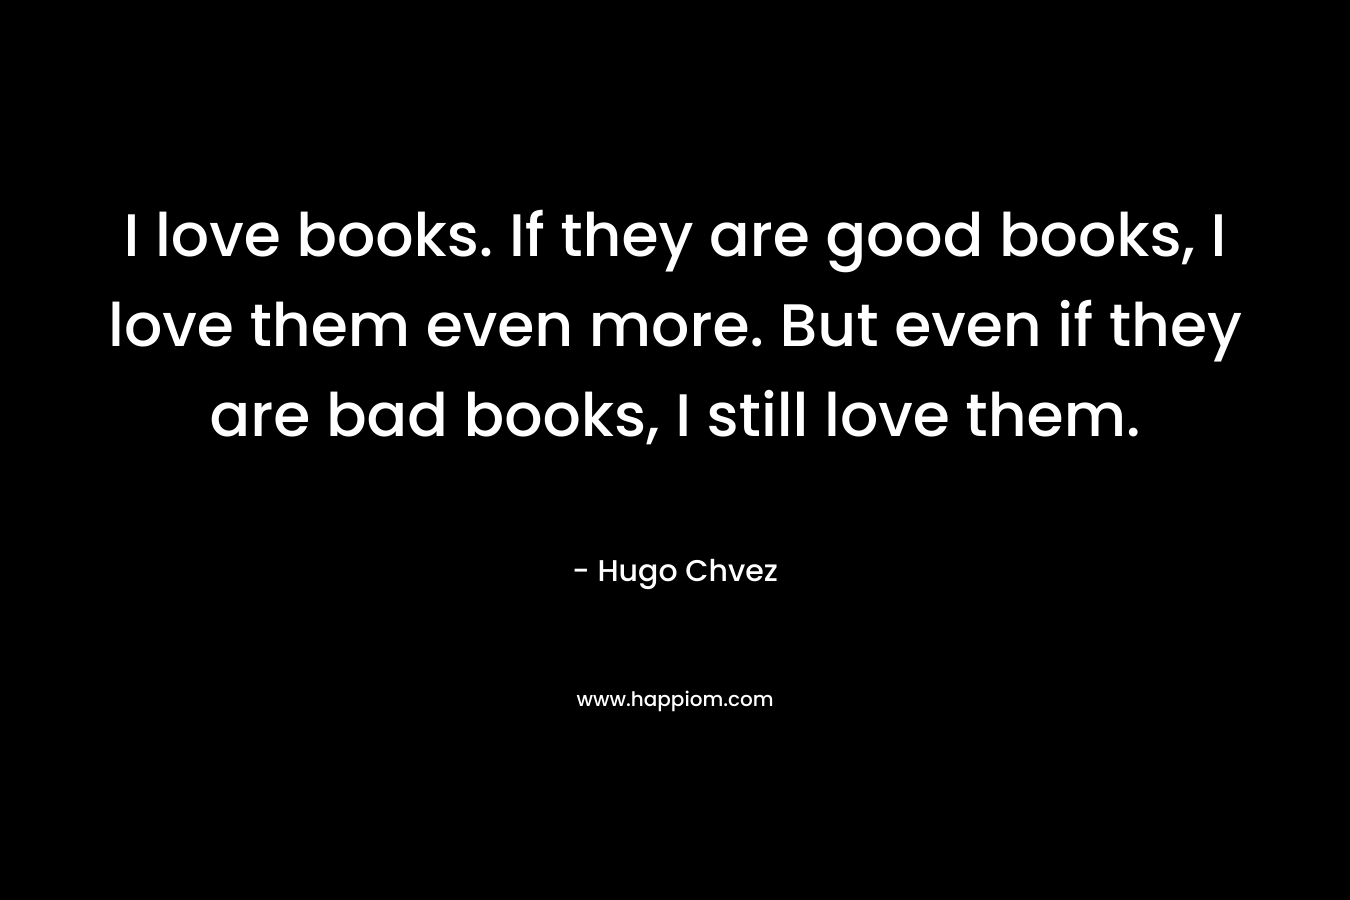 I love books. If they are good books, I love them even more. But even if they are bad books, I still love them.